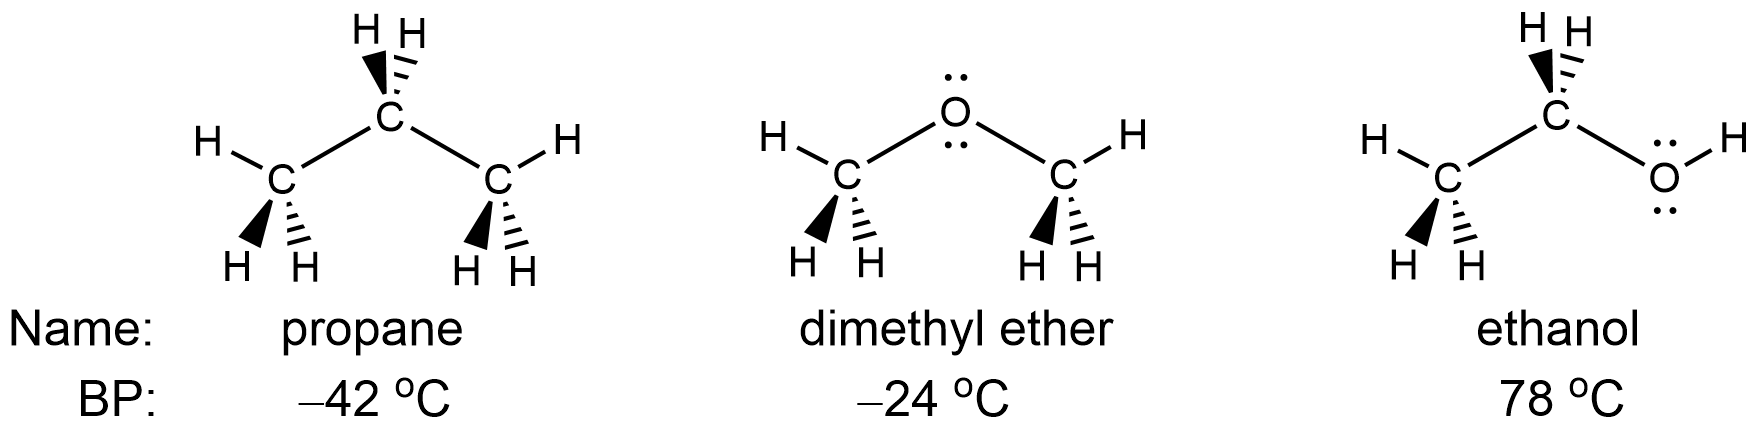 lewis structure of dimethyl ether